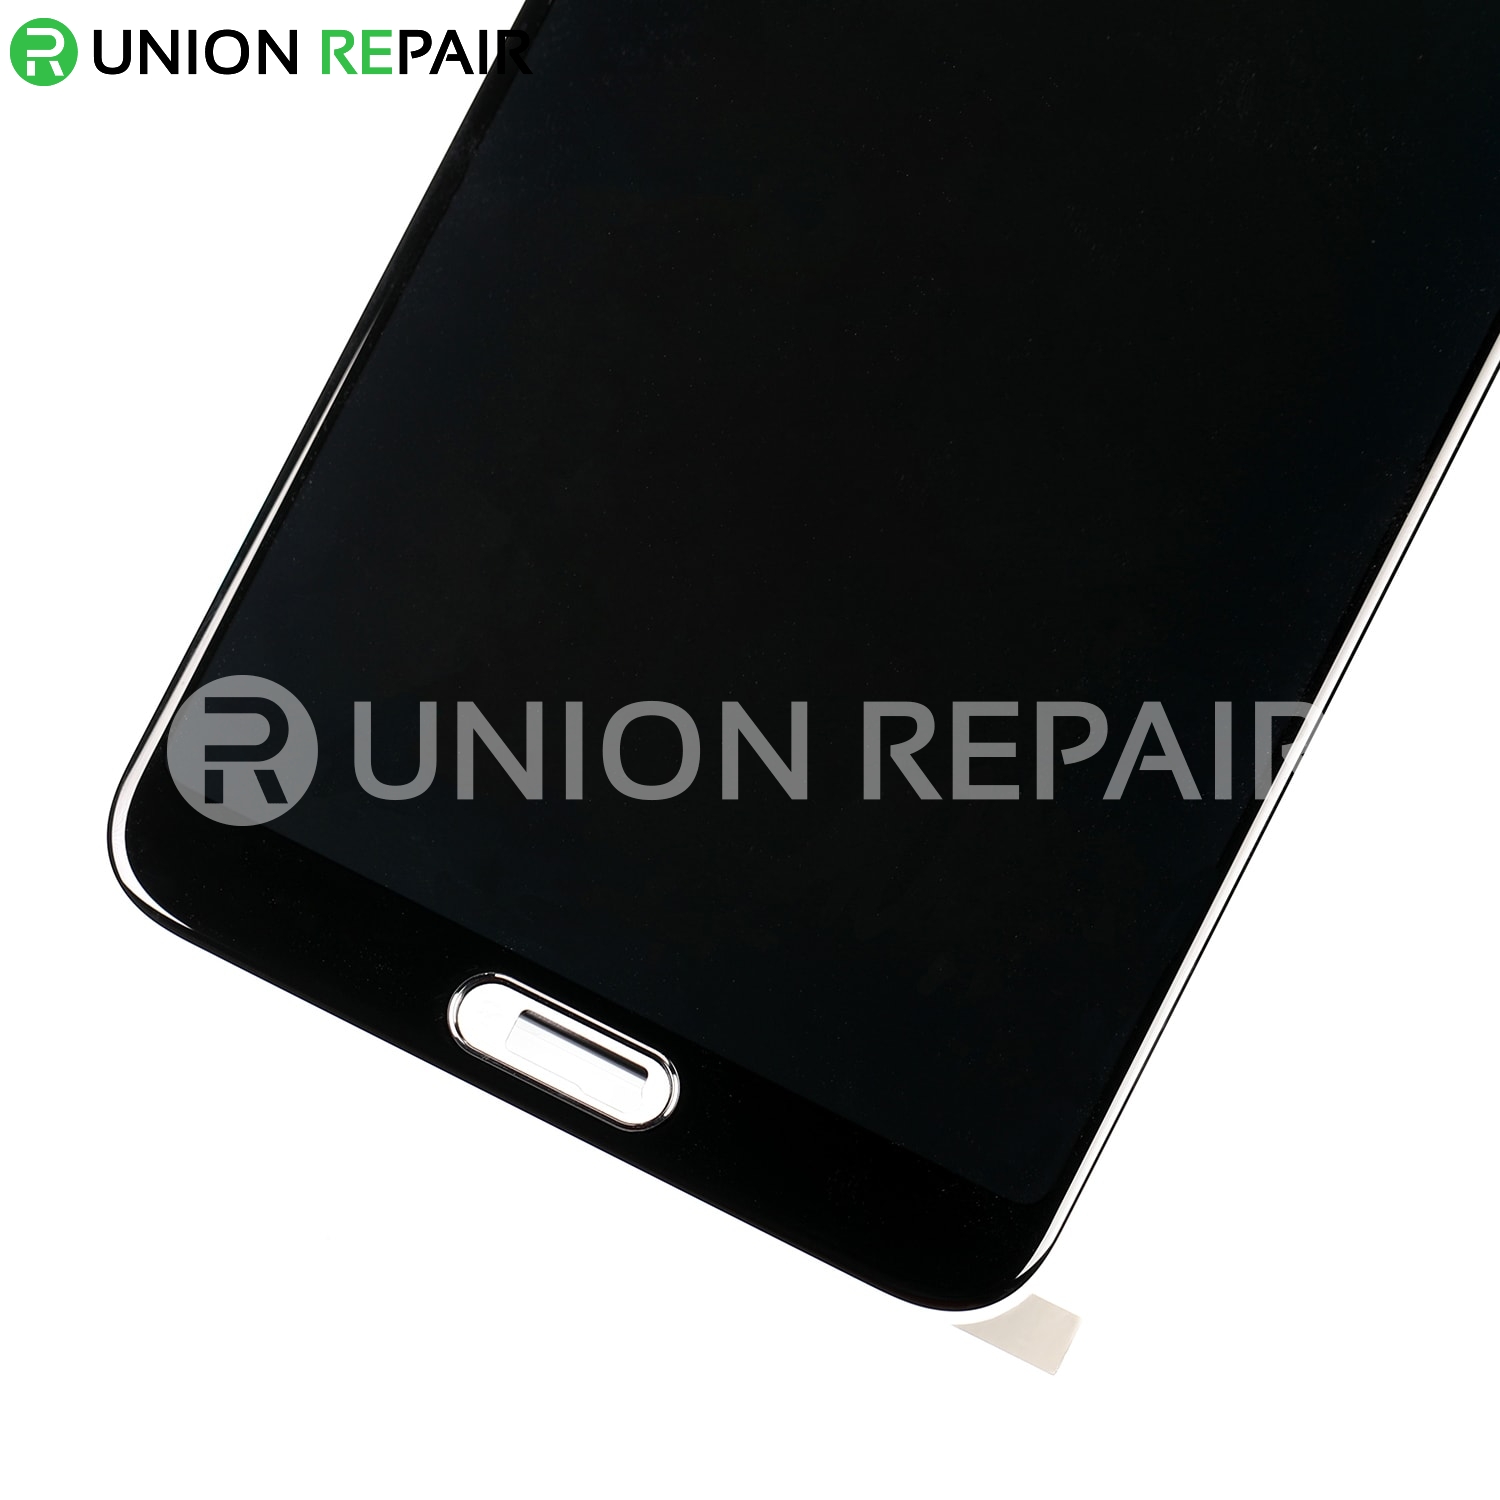 Replacement for Huawei P20 Pro LCD with Digitizer Assembly - Black